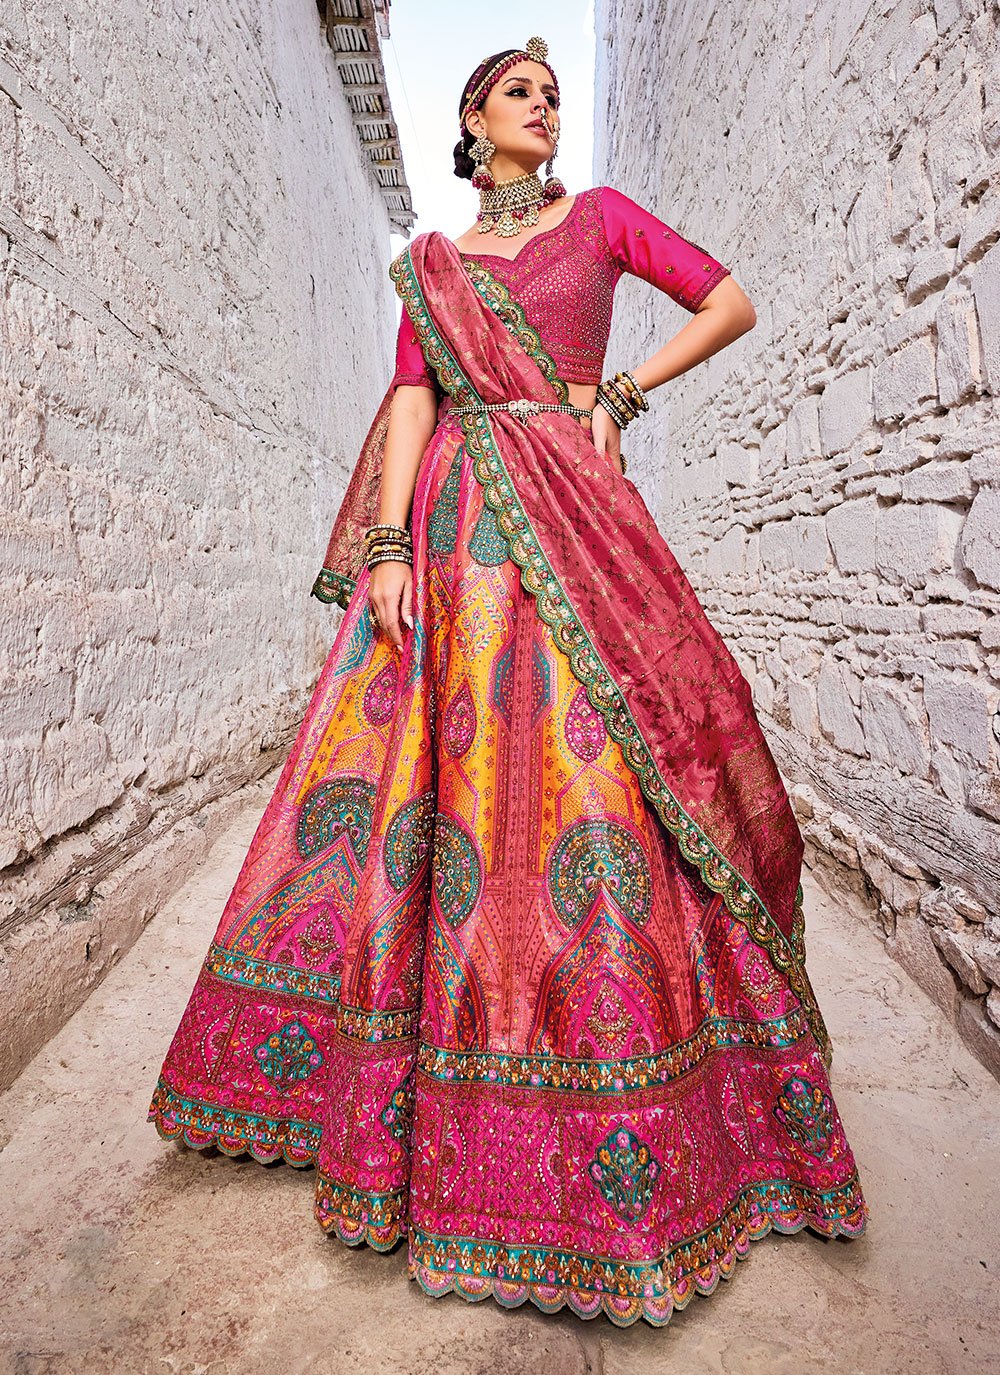 Lehanga house - *🤳THE ONLINE BRAND* *🥢LEHENGA COLLECTION * 📀  📀📀📀📀📀📀📀📀📀 *PRESENT NEW LEHENGA COLLECTION* *DN:MC9089* 👗 *LEHENGA:  TAPETA SILK WITH EMBROIDERY WORK* 👚 *INNER: SATIN SILK WITH CAN CAN* 👘  *DUPATTA: